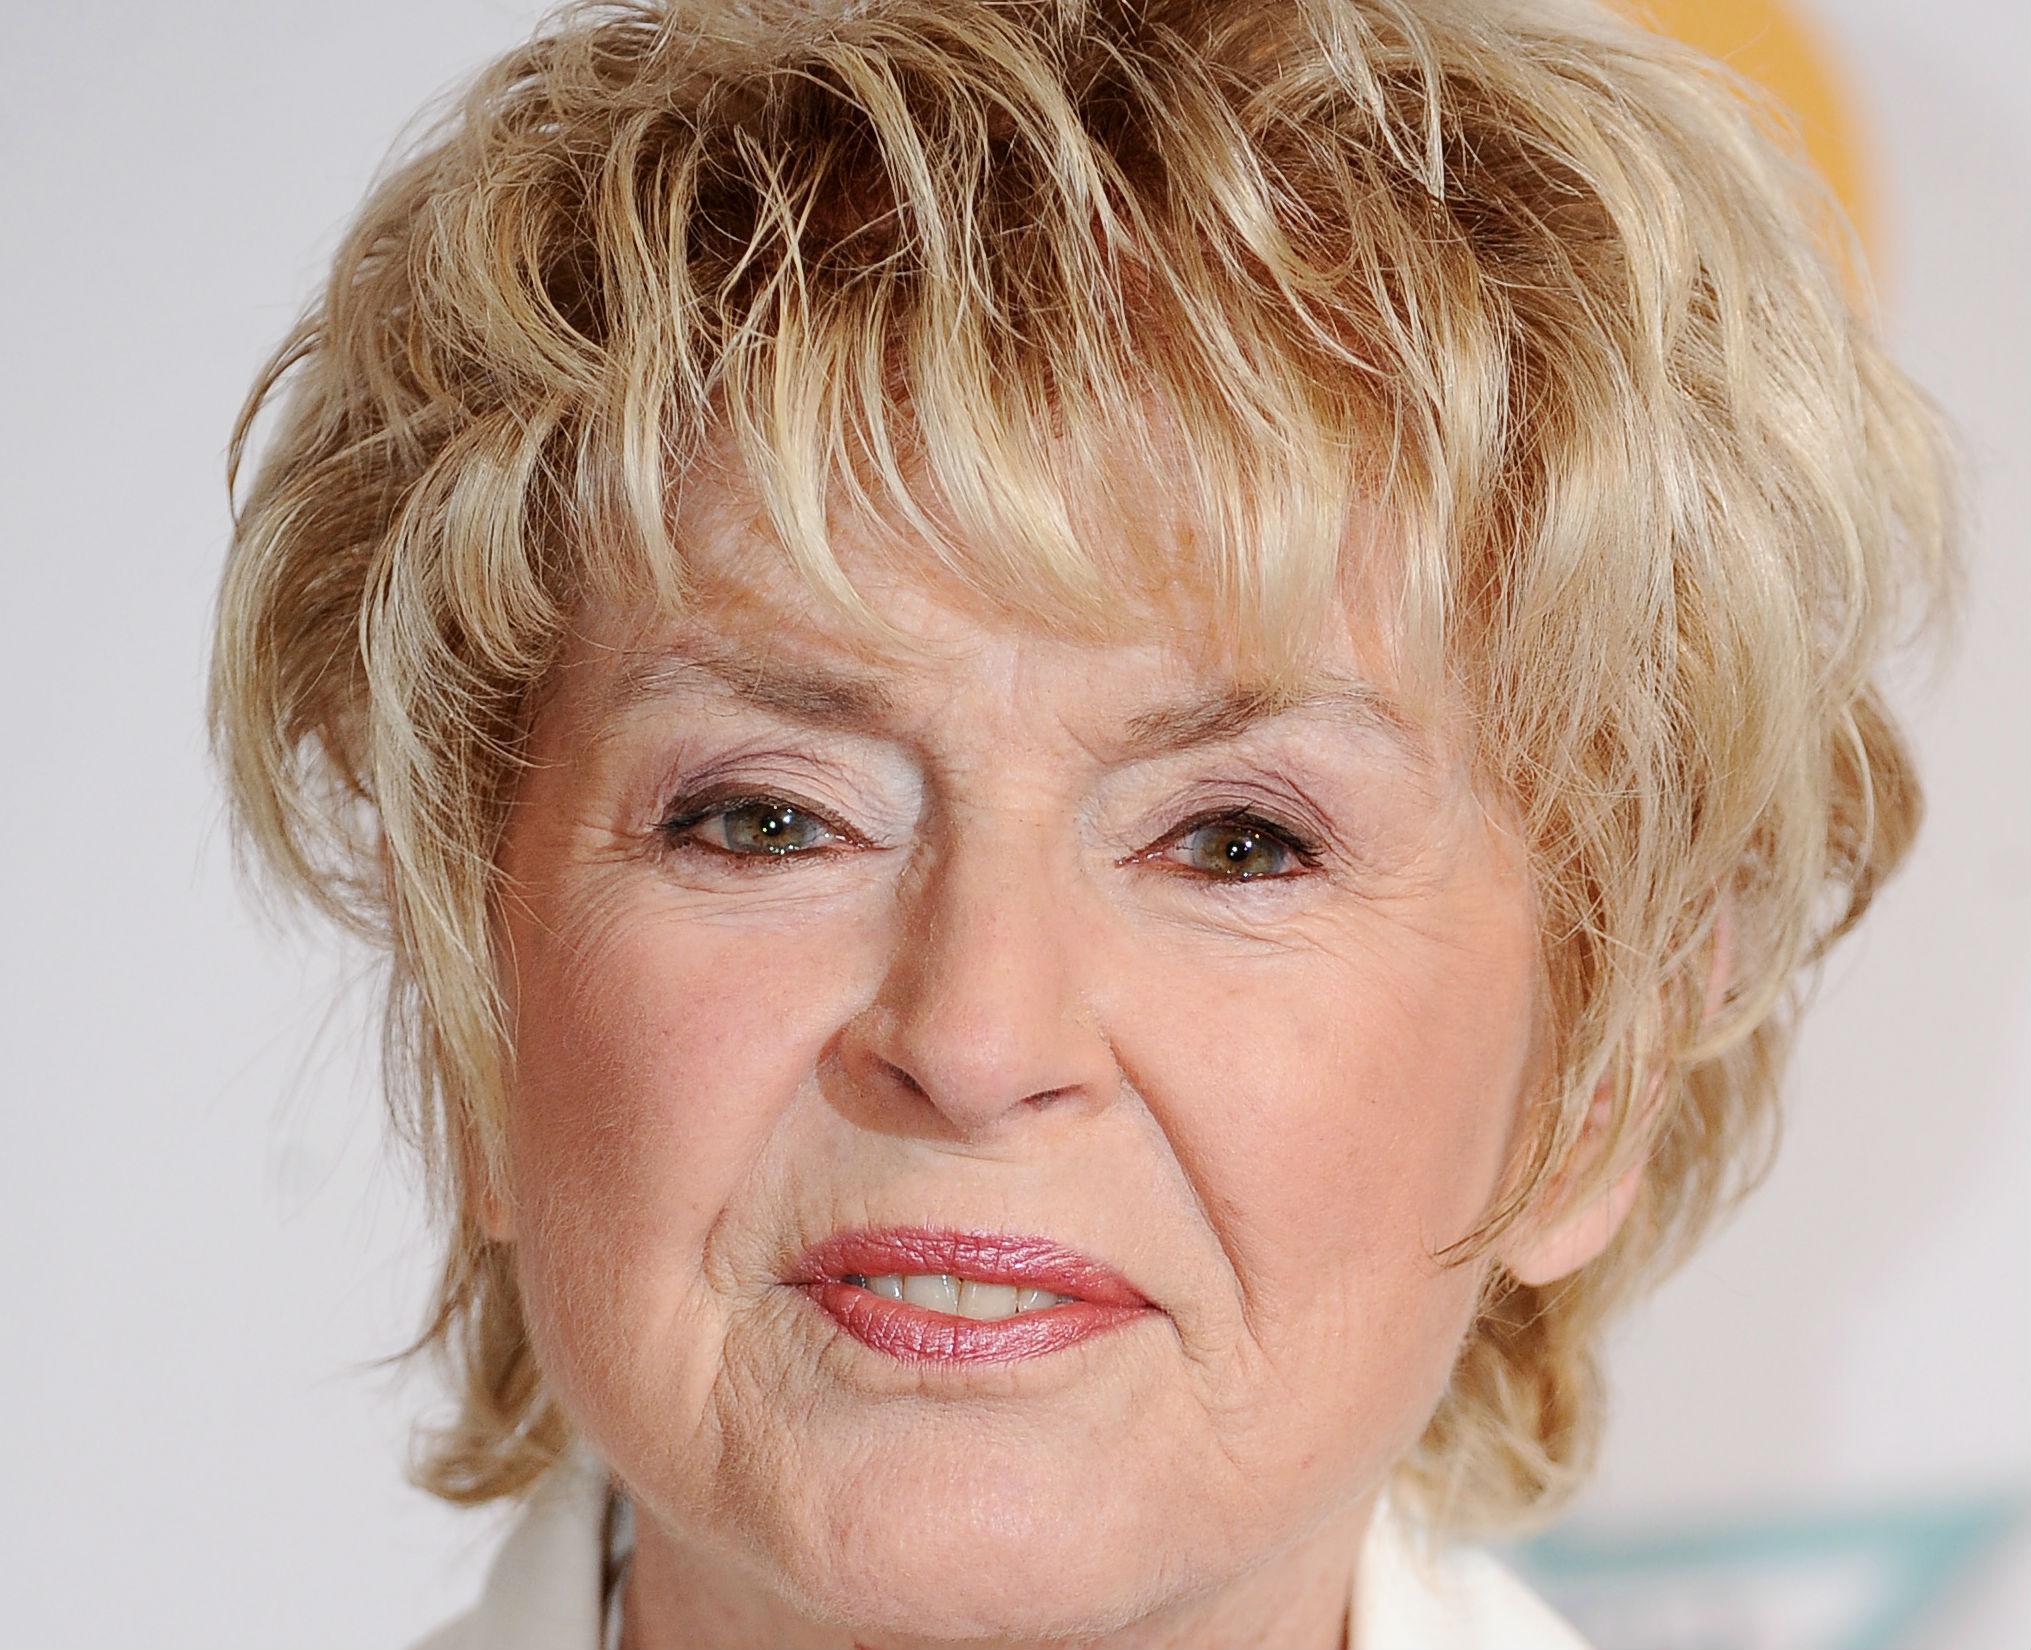 Rip Off Britains Gloria Hunniford Loses £120000 After Woman Walks Into Bank Pretending To Be